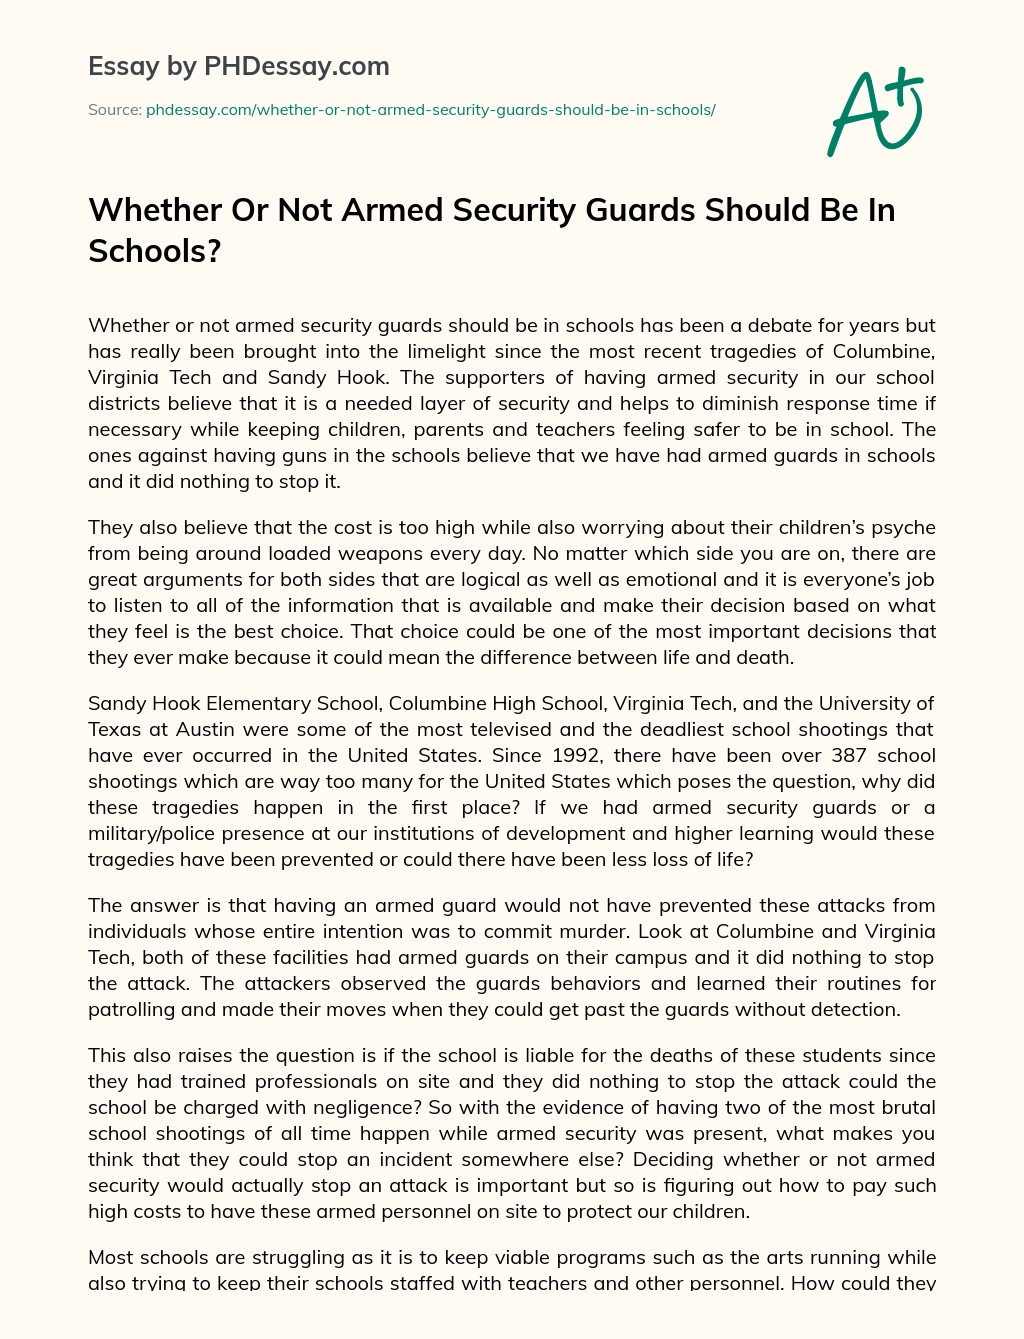 Whether Or Not Armed Security Guards Should Be In Schools? essay